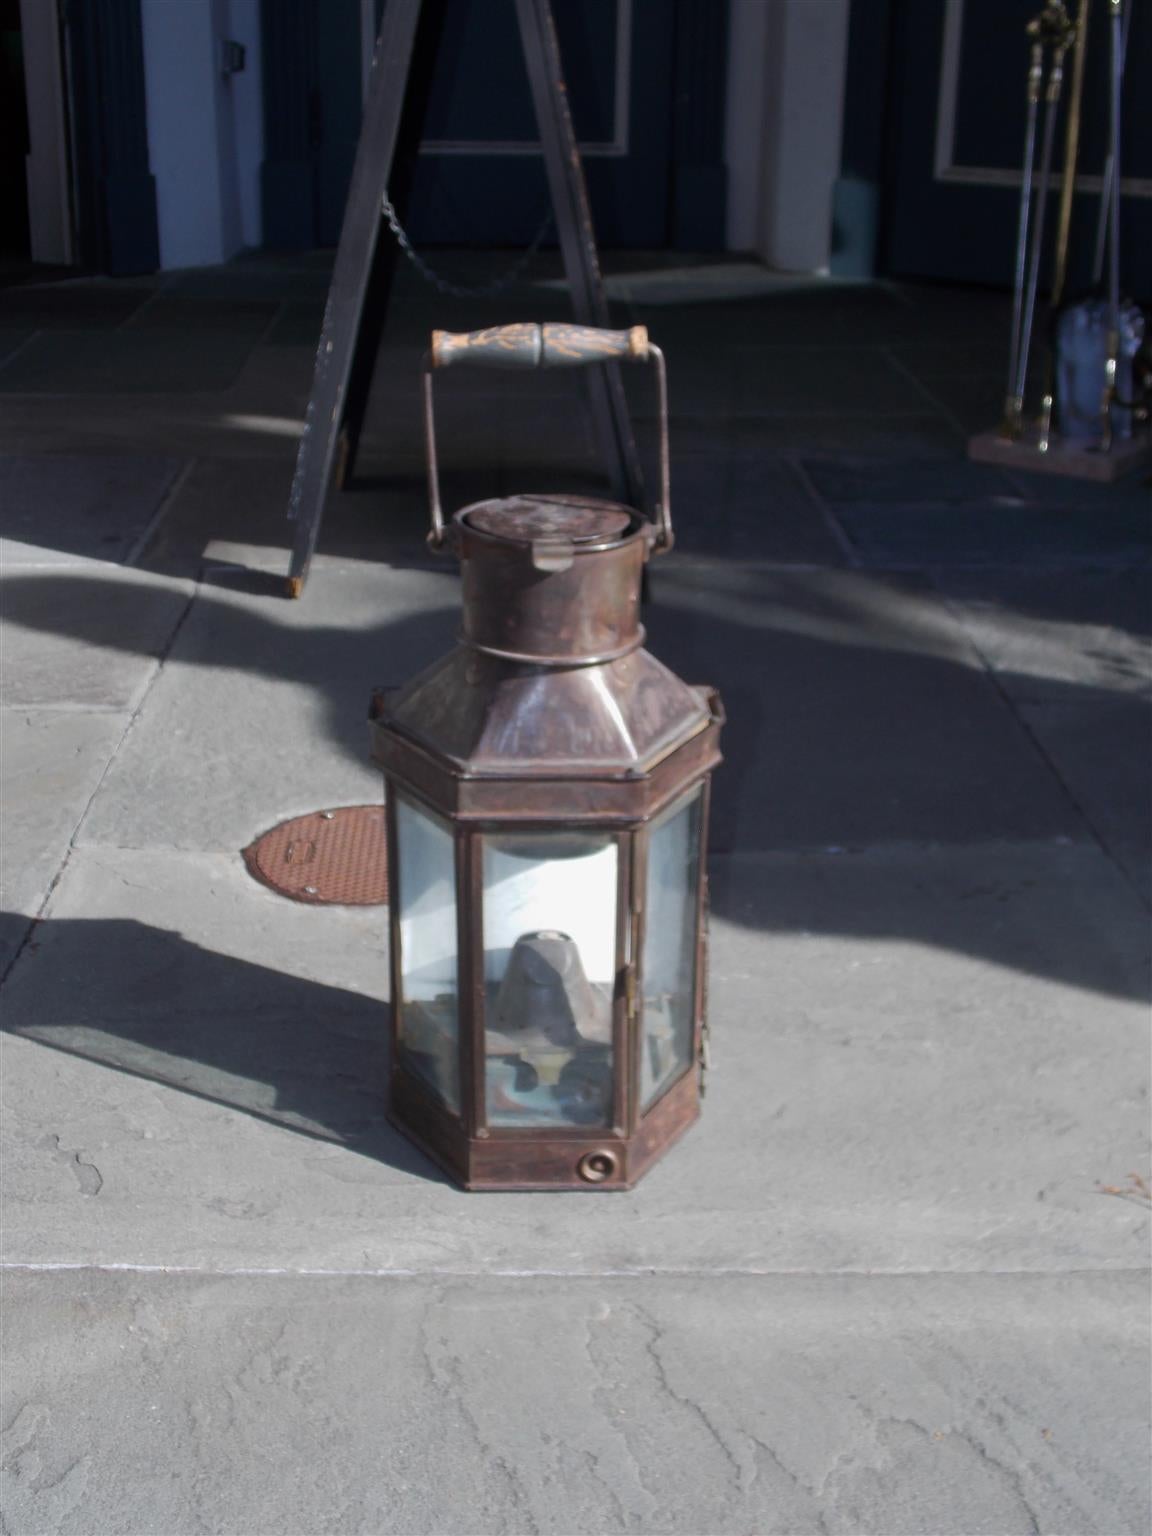 English polished steel nautical yacht cabin lantern with wooden carrying handle, vented chimney, three glass panels, porcelain back, and original oil burner, Mid-19th Century. Stamped Best and Lloyd, Birmingham.